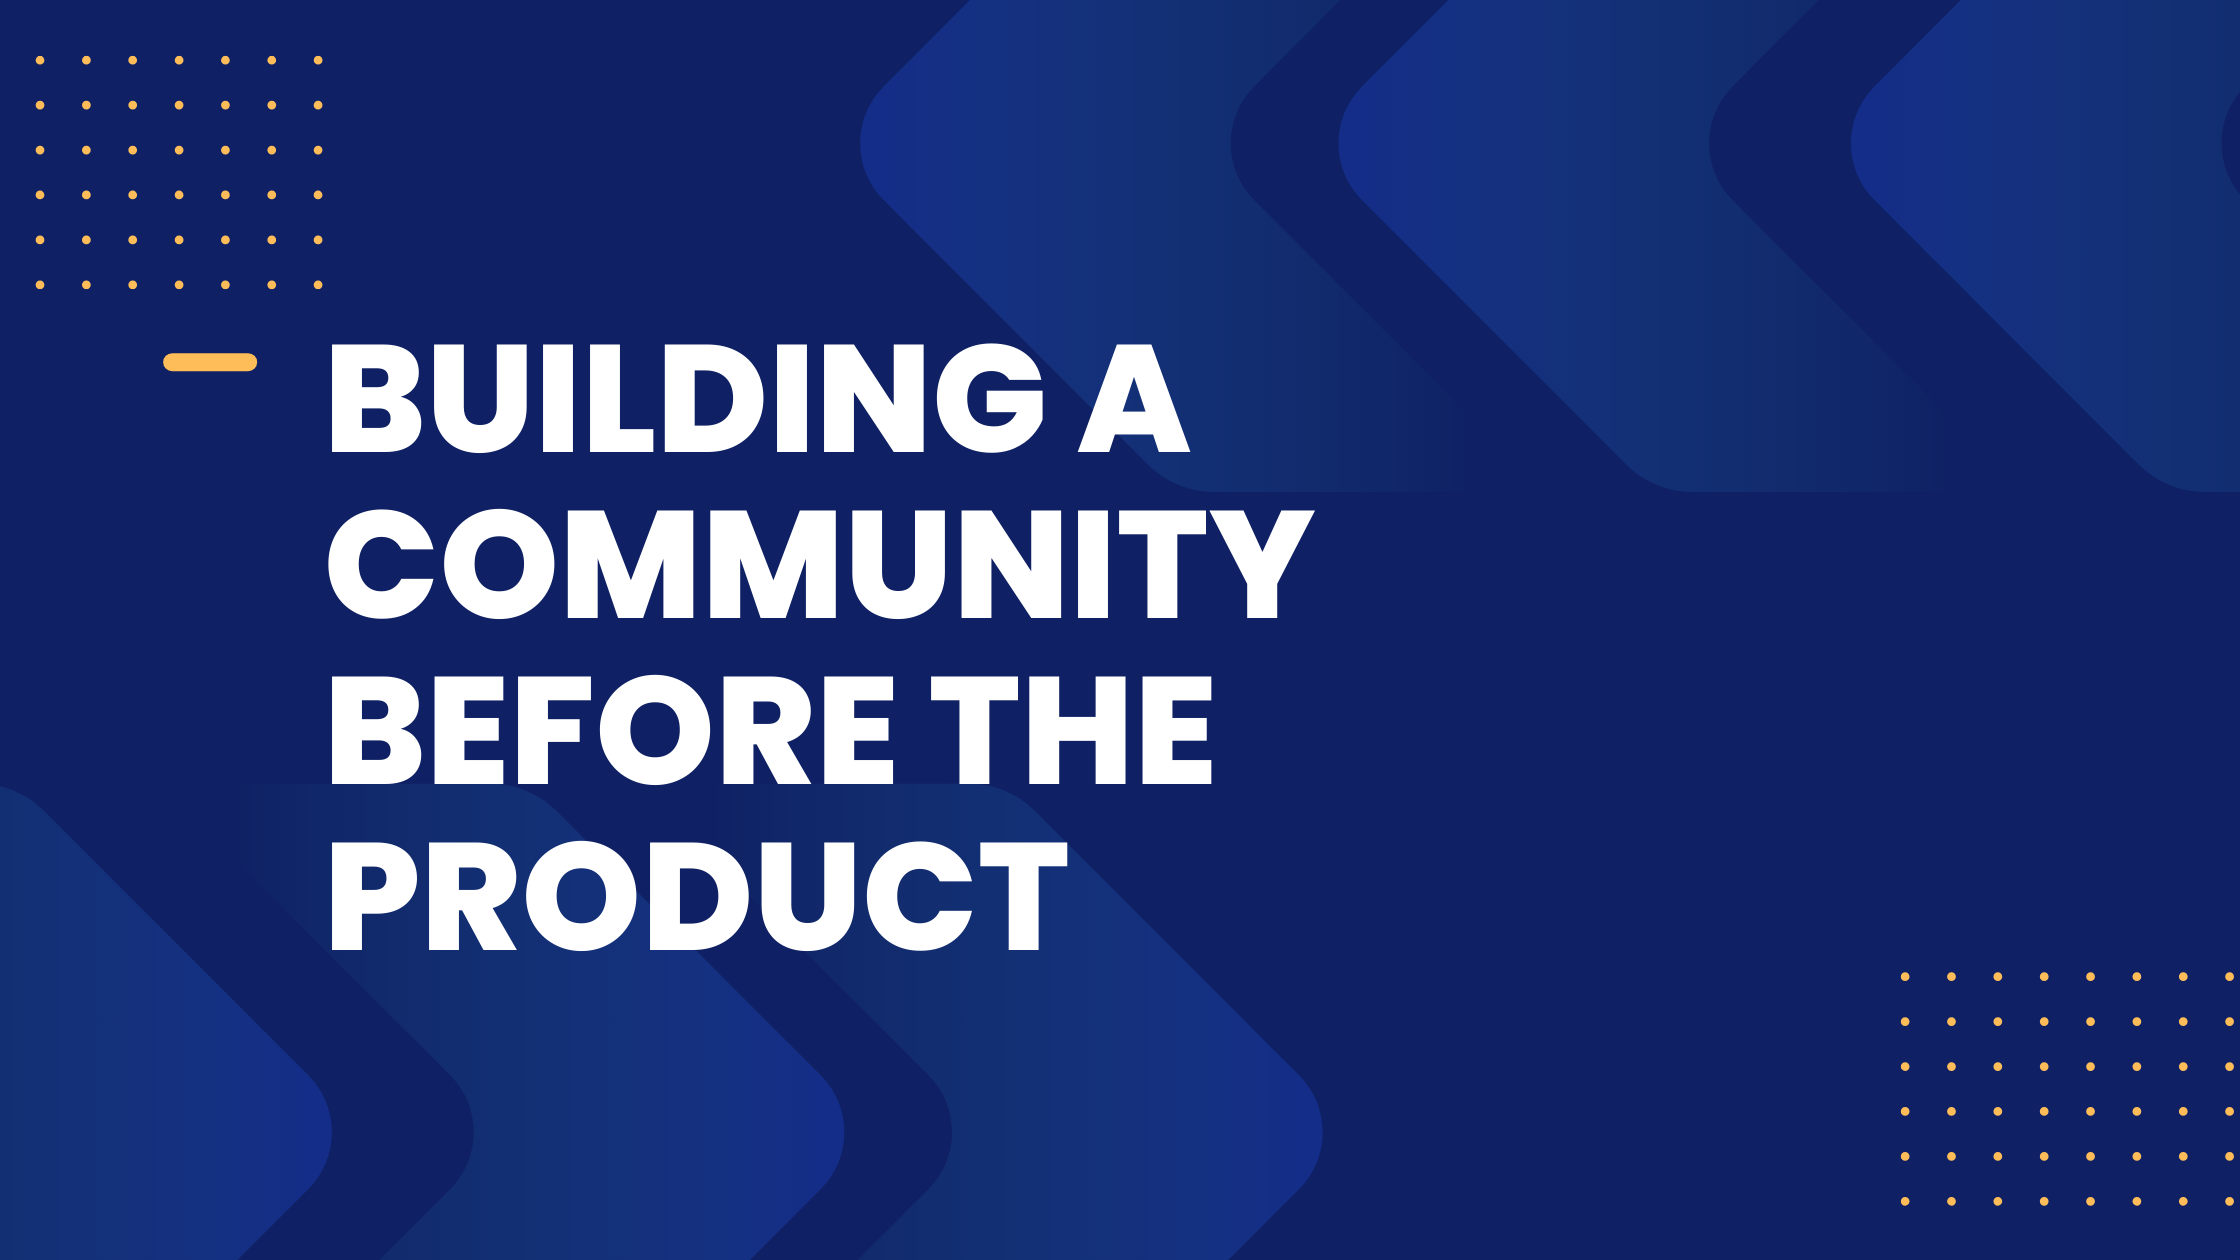 Building a community before the product